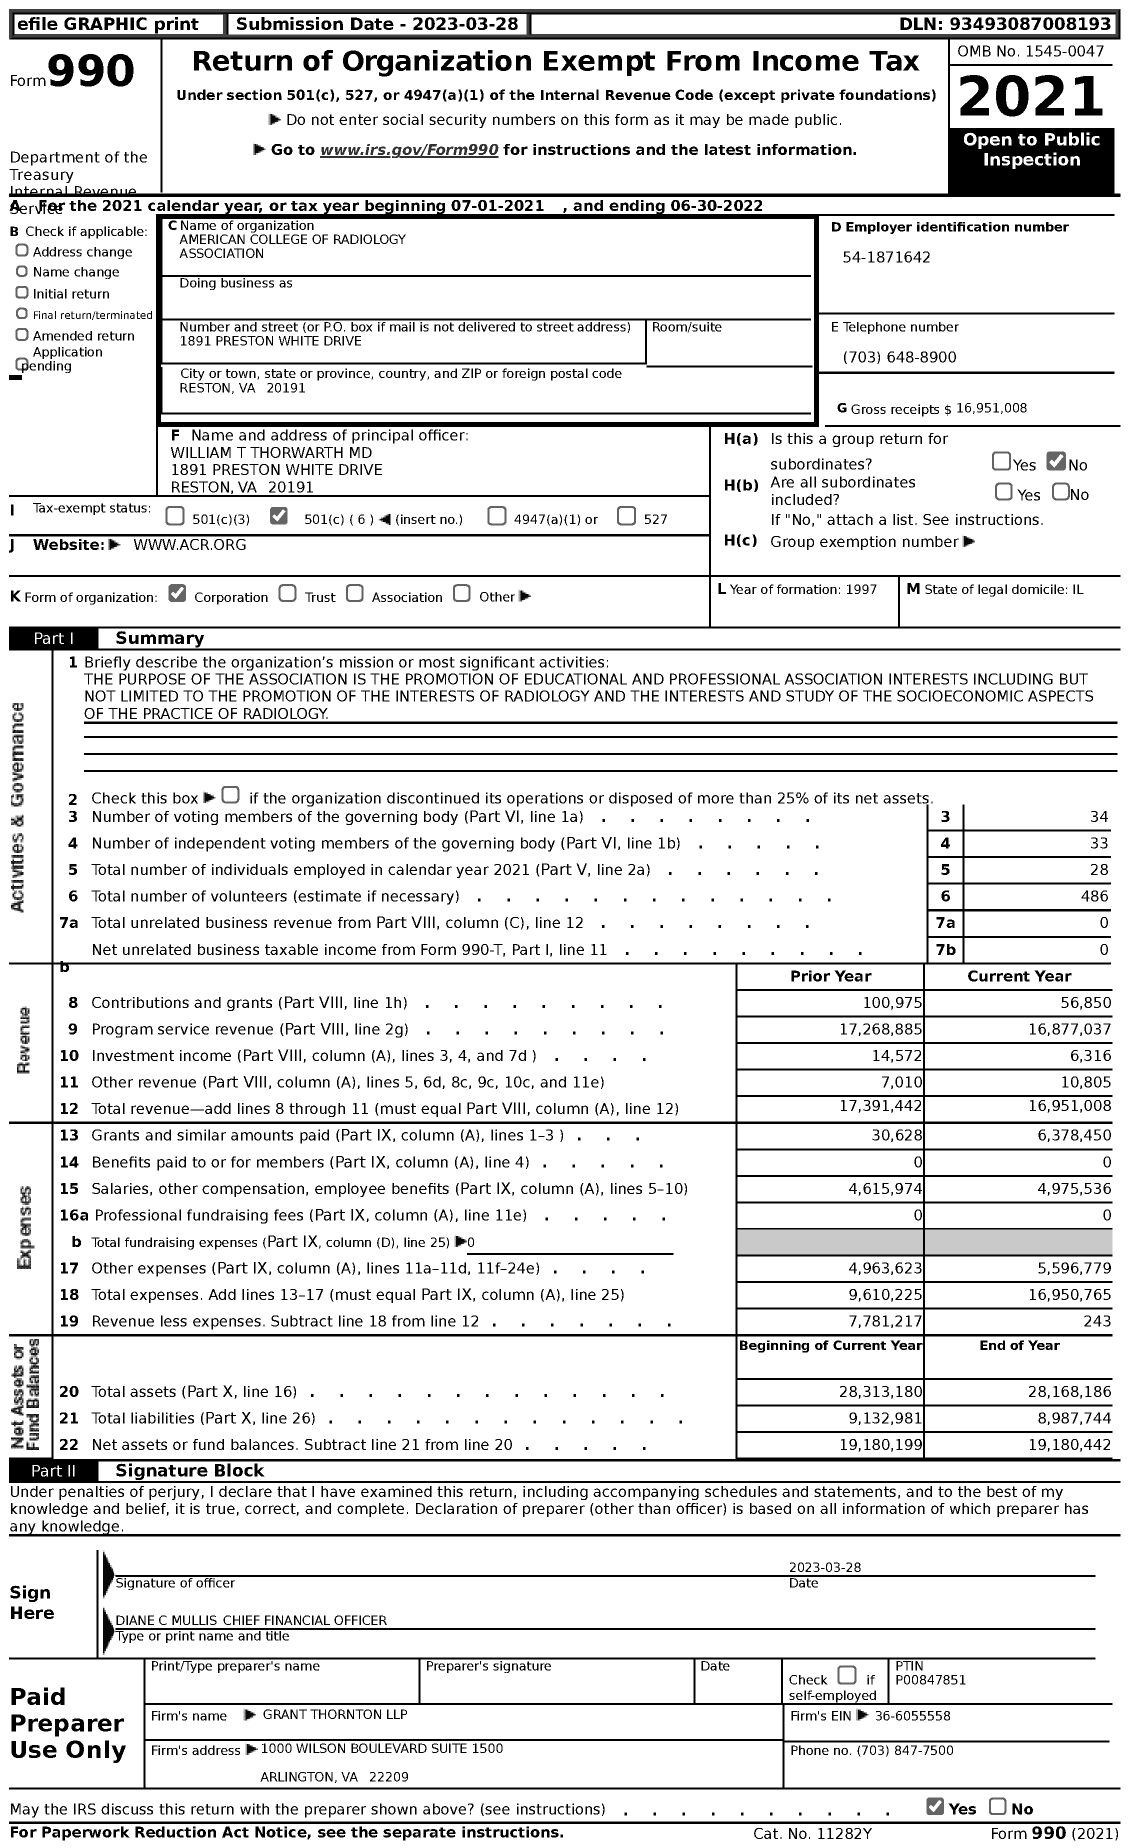 Image of first page of 2021 Form 990 for American College of Radiology (ACR)